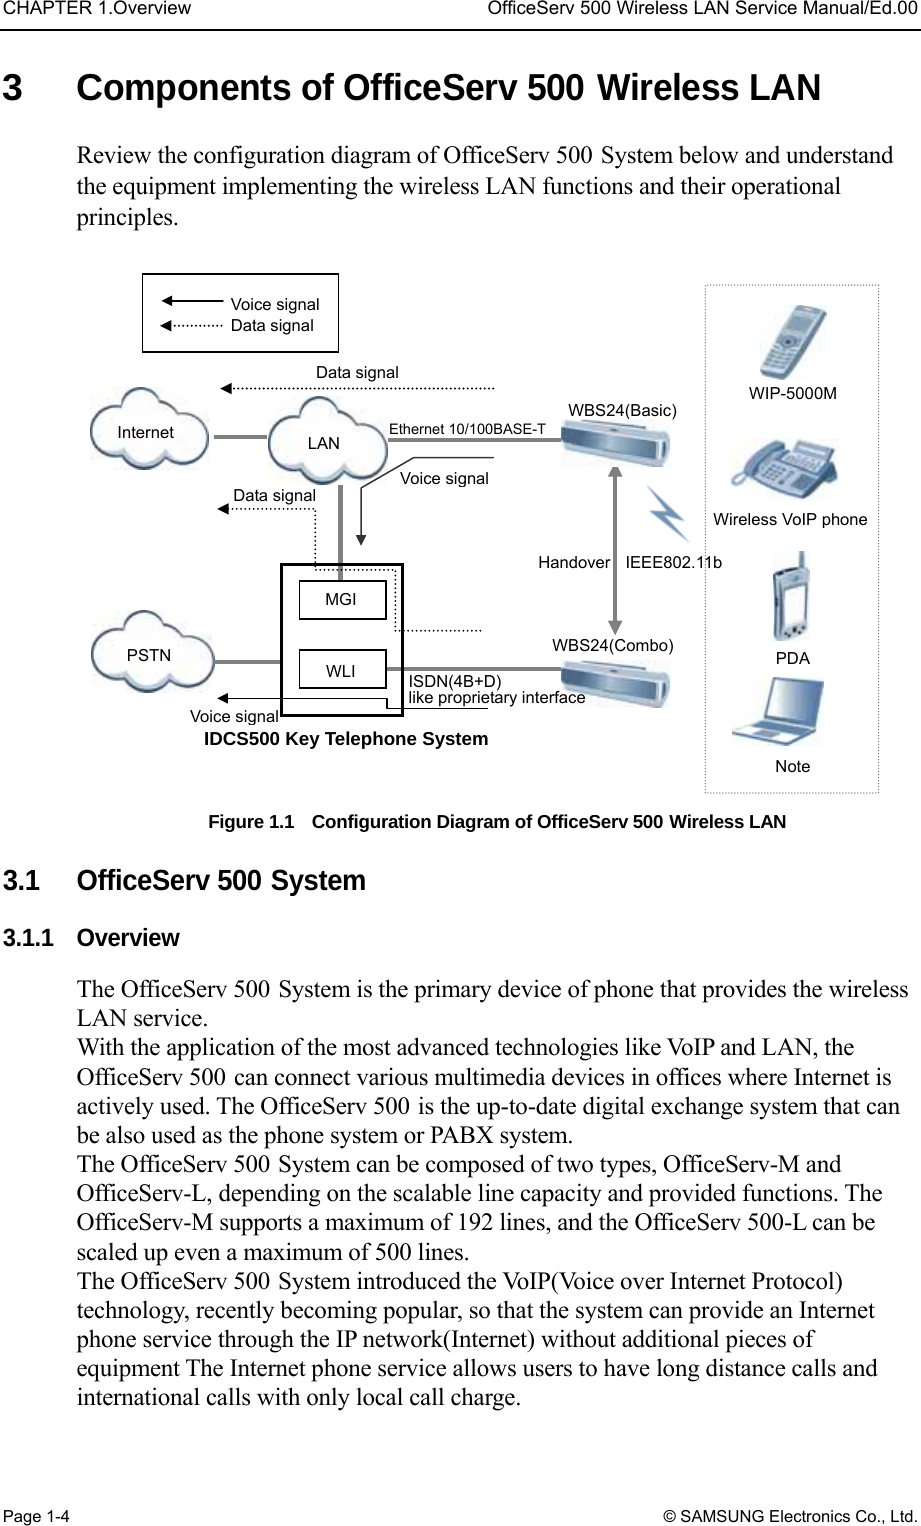 CHAPTER 1.Overview  OfficeServ 500 Wireless LAN Service Manual/Ed.00 Page 1-4 © SAMSUNG Electronics Co., Ltd. 3 Components of OfficeServ 500 Wireless LAN Review the configuration diagram of OfficeServ 500 System below and understand the equipment implementing the wireless LAN functions and their operational principles.  Figure 1.1    Configuration Diagram of OfficeServ 500 Wireless LAN  3.1   OfficeServ 500 System 3.1.1 Overview The OfficeServ 500 System is the primary device of phone that provides the wireless LAN service. With the application of the most advanced technologies like VoIP and LAN, the OfficeServ 500 can connect various multimedia devices in offices where Internet is actively used. The OfficeServ 500 is the up-to-date digital exchange system that can be also used as the phone system or PABX system. The OfficeServ 500 System can be composed of two types, OfficeServ-M and OfficeServ-L, depending on the scalable line capacity and provided functions. The OfficeServ-M supports a maximum of 192 lines, and the OfficeServ 500-L can be scaled up even a maximum of 500 lines. The OfficeServ 500 System introduced the VoIP(Voice over Internet Protocol) technology, recently becoming popular, so that the system can provide an Internet phone service through the IP network(Internet) without additional pieces of equipment The Internet phone service allows users to have long distance calls and international calls with only local call charge.   Ethernet 10/100BASE-T IEEE802.11bIDCS500 Key Telephone SystemWBS24(Basic)WBS24(Combo)  Voice signal Data signal Data signalLAN Data signal Handover Voice signal Voice signalMGI WLI Internet PSTN WIP-5000M Wireless VoIP phone PDA Note ISDN(4B+D) like proprietary interface 